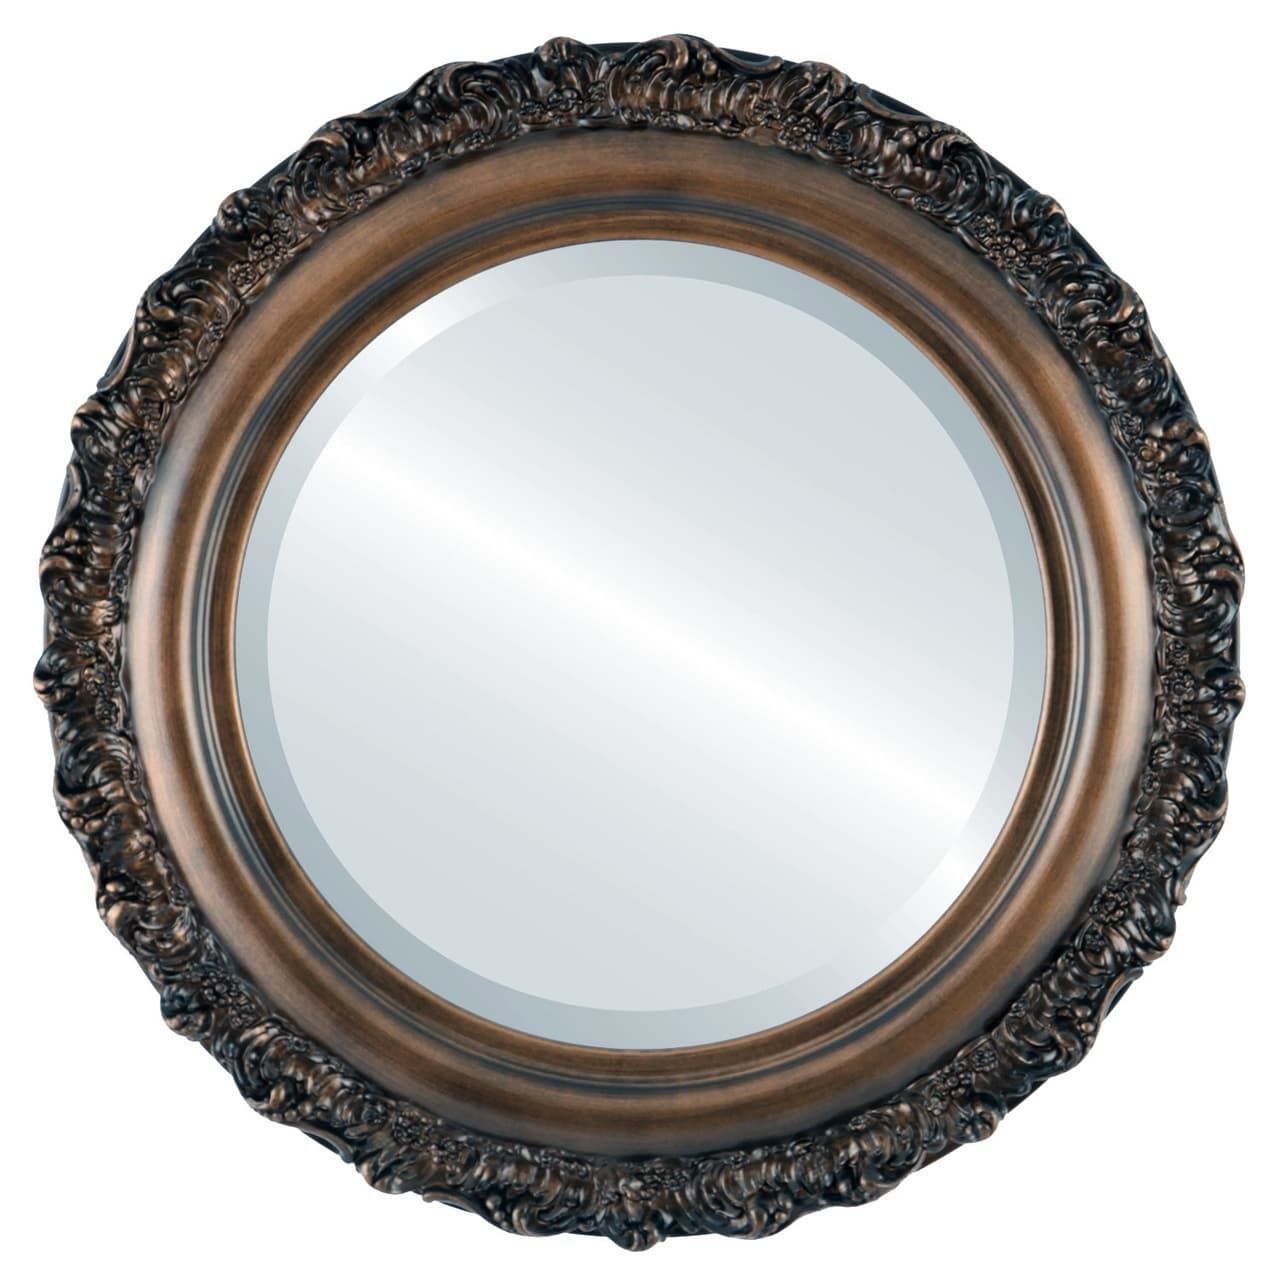 The Oval And Round Mirror Store Venice Framed Round Mirror In Rubbed Within Bronze Quatrefoil Wall Mirrors (View 2 of 15)